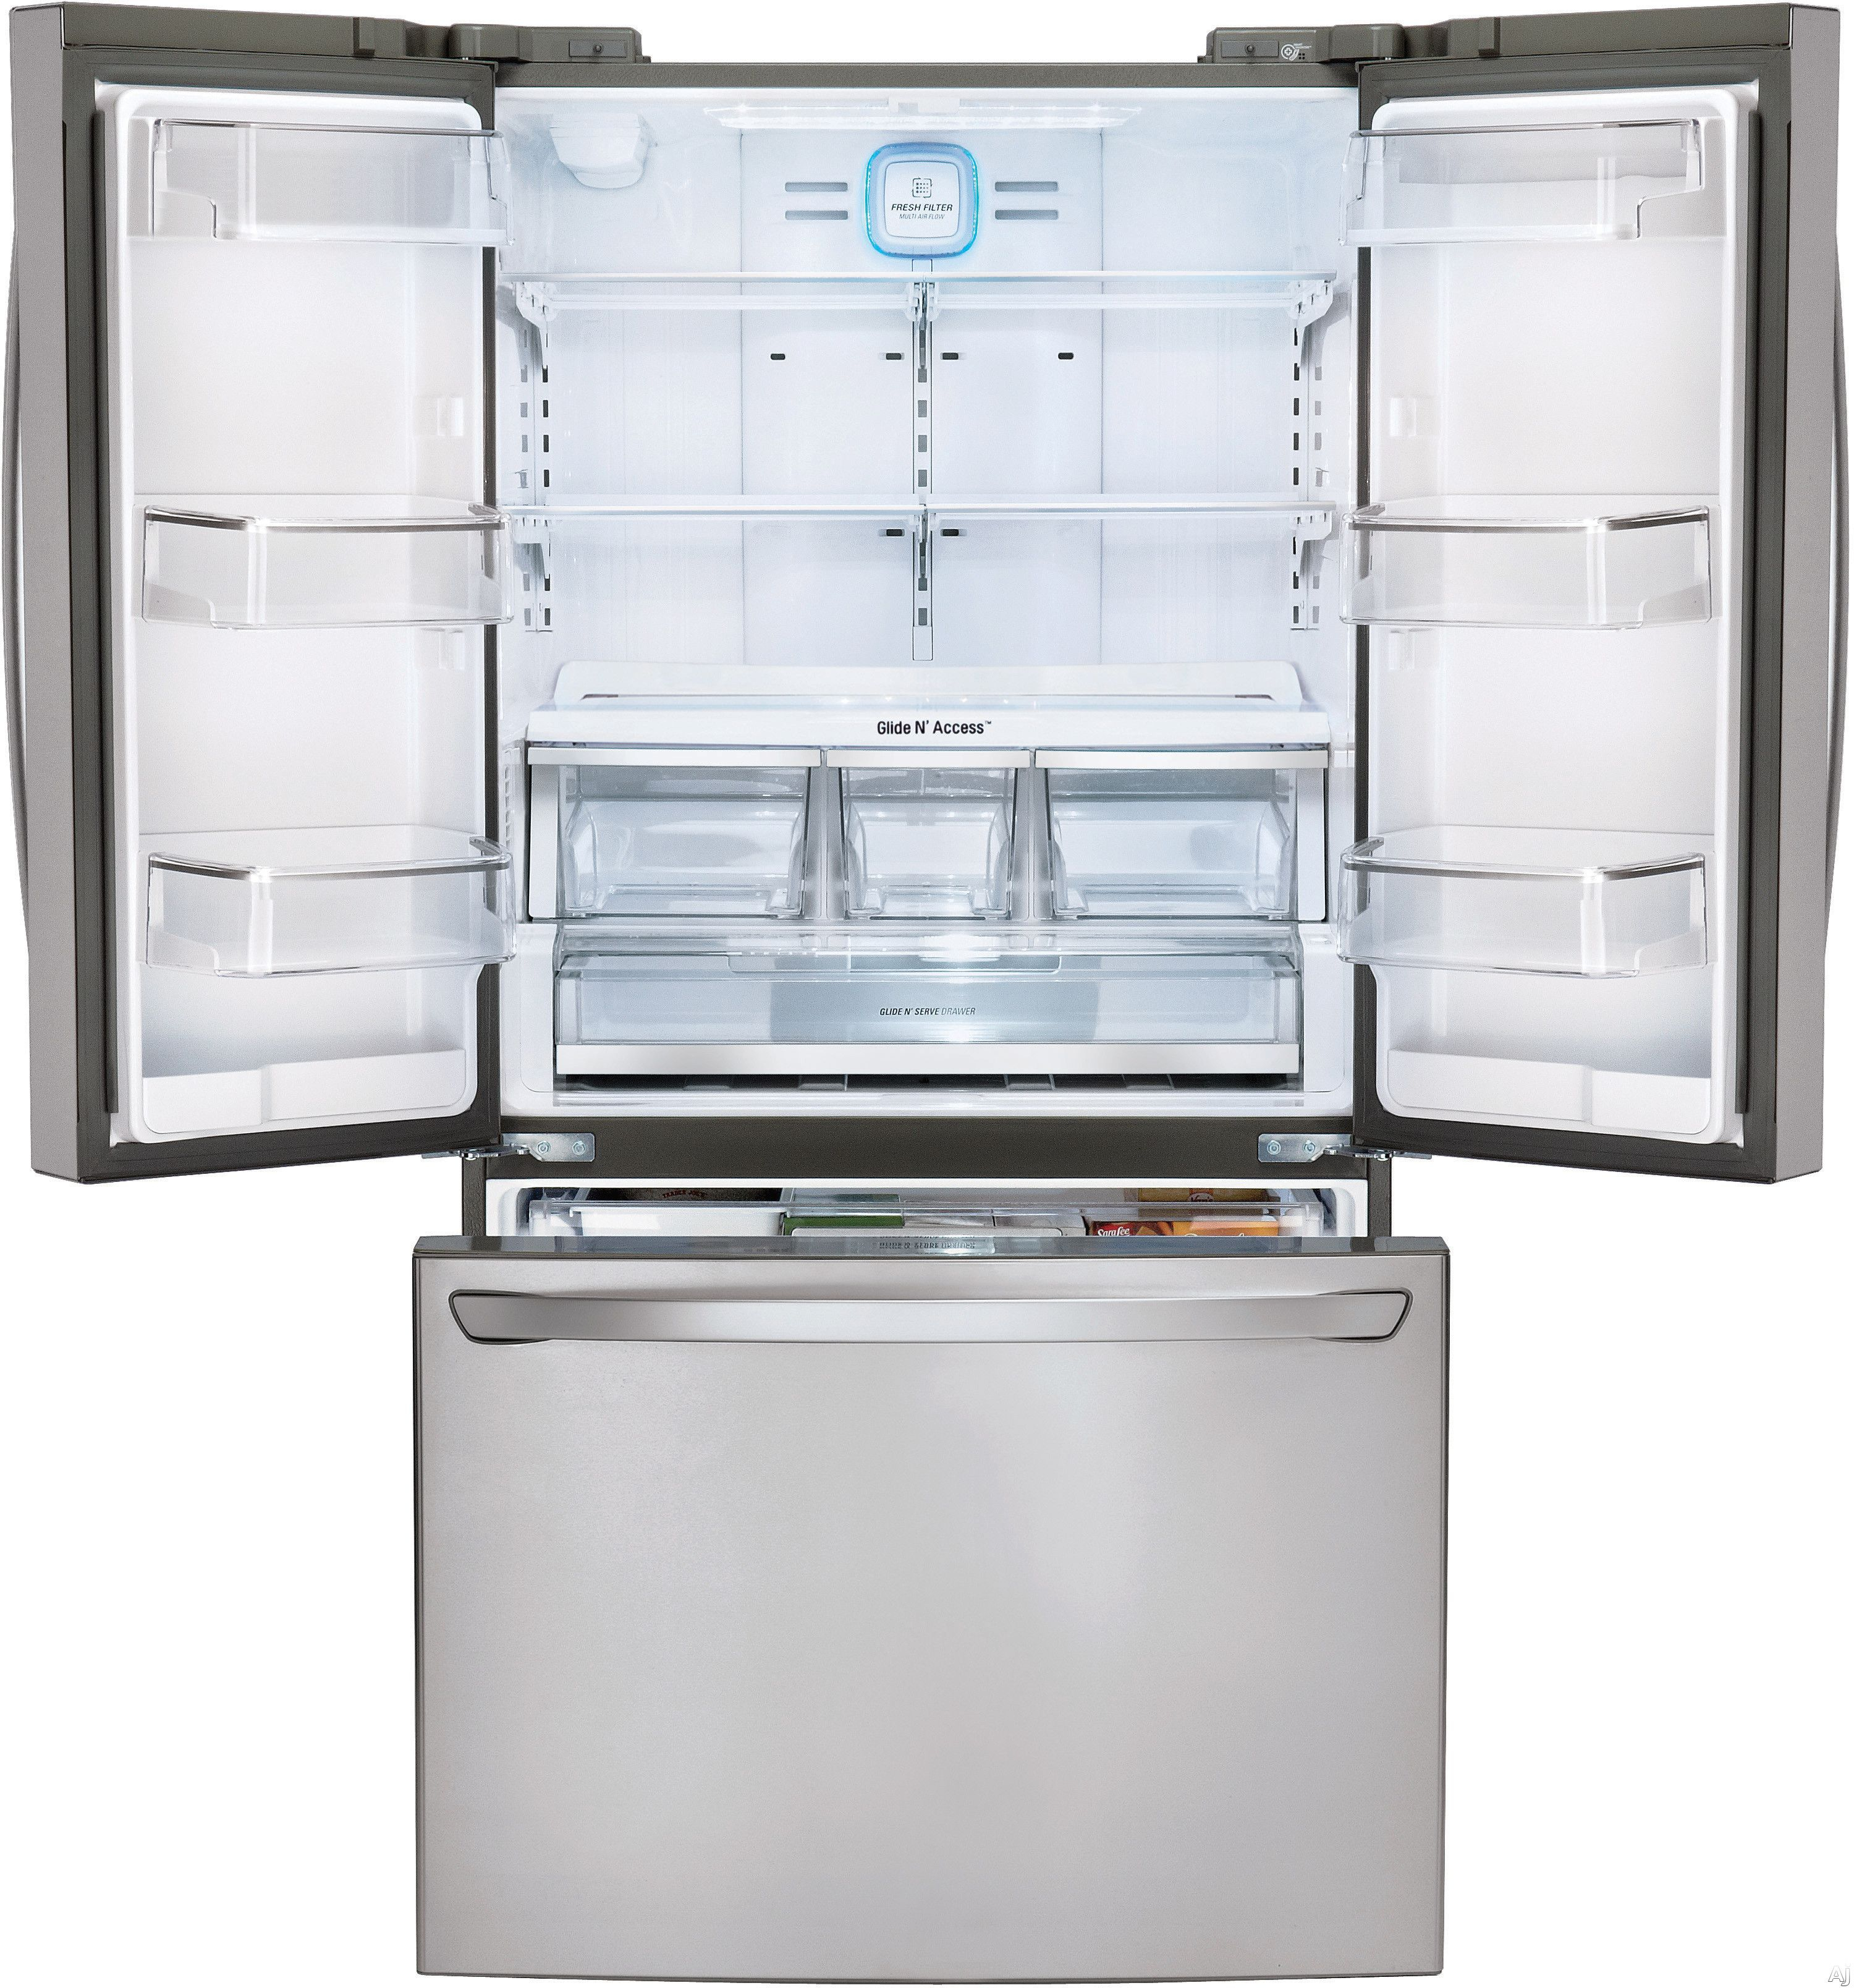 Lg Lfcs31626s 313 Cu Ft French Door Refrigerator With Glide N intended for proportions 3000 X 3216